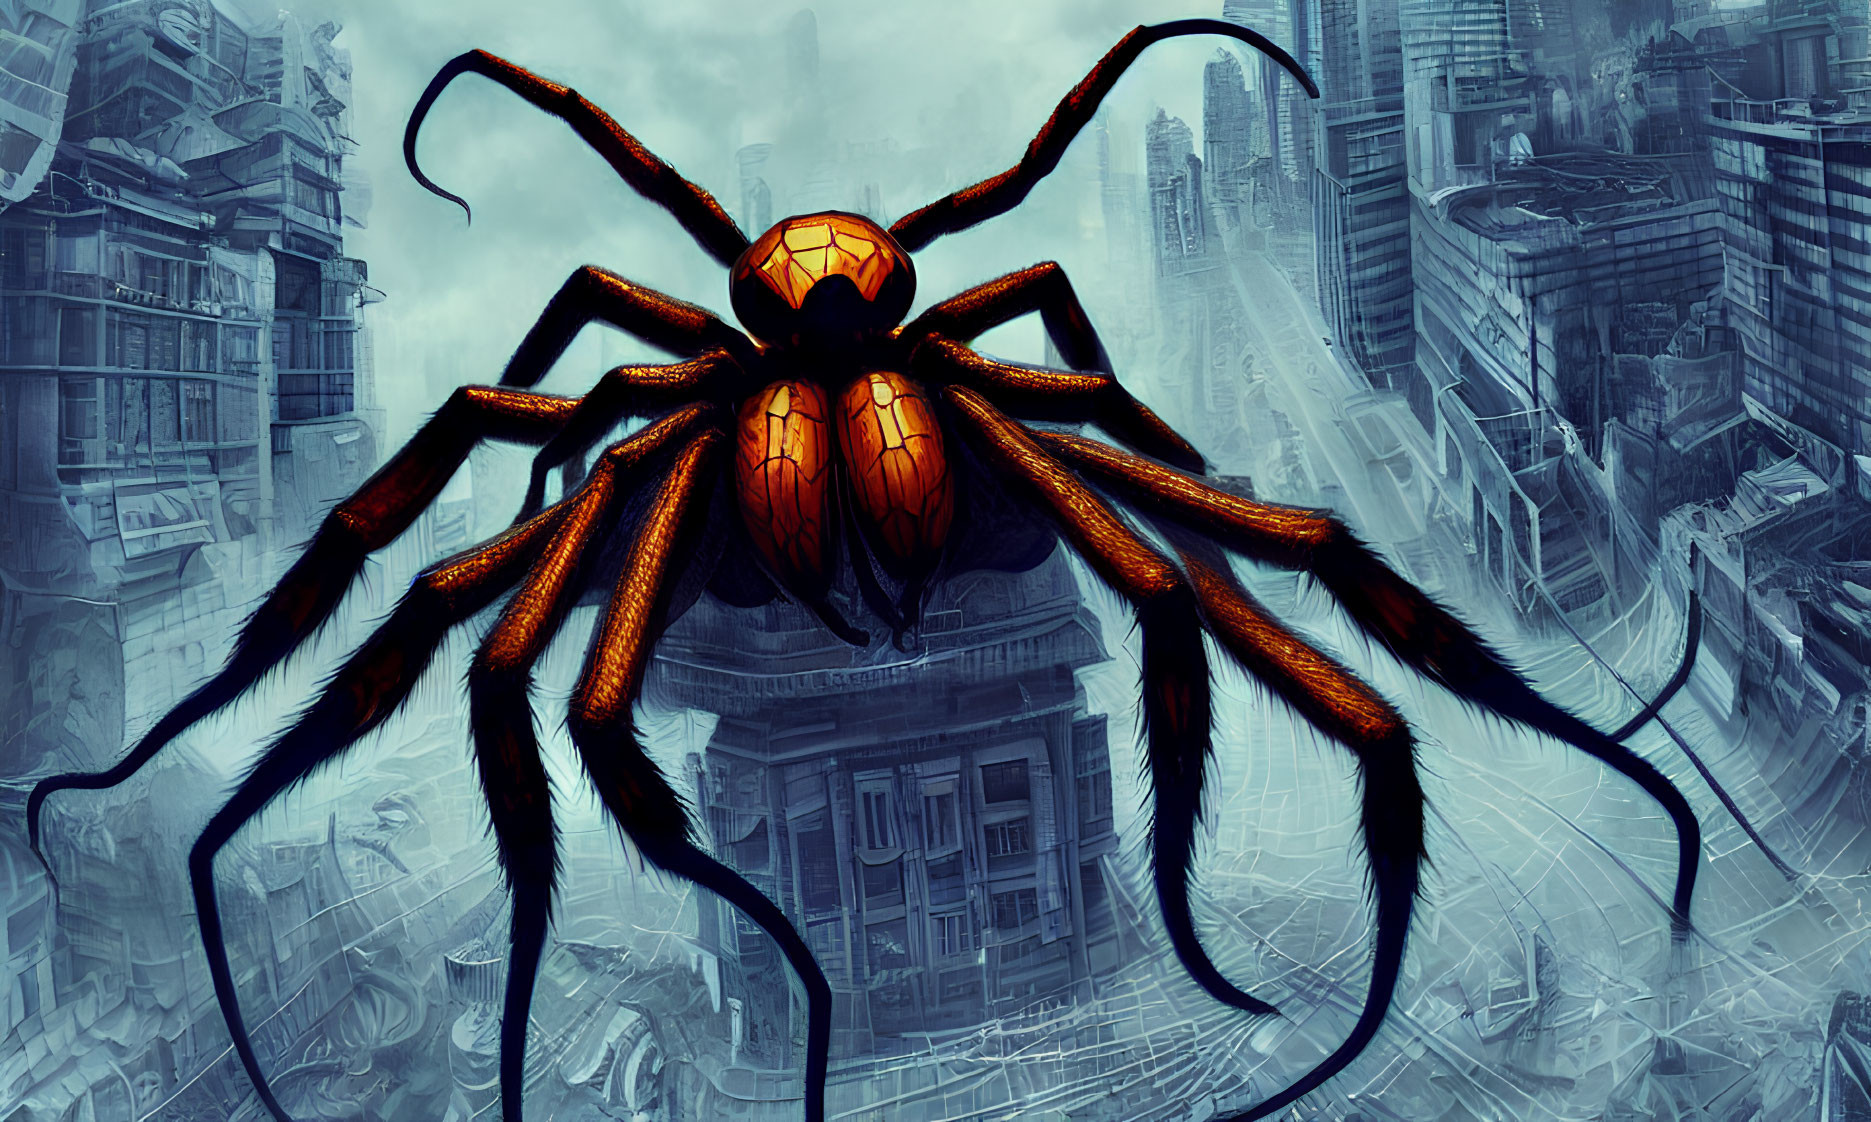 Giant Spider with Glowing Orange Markings in Futuristic Cityscape